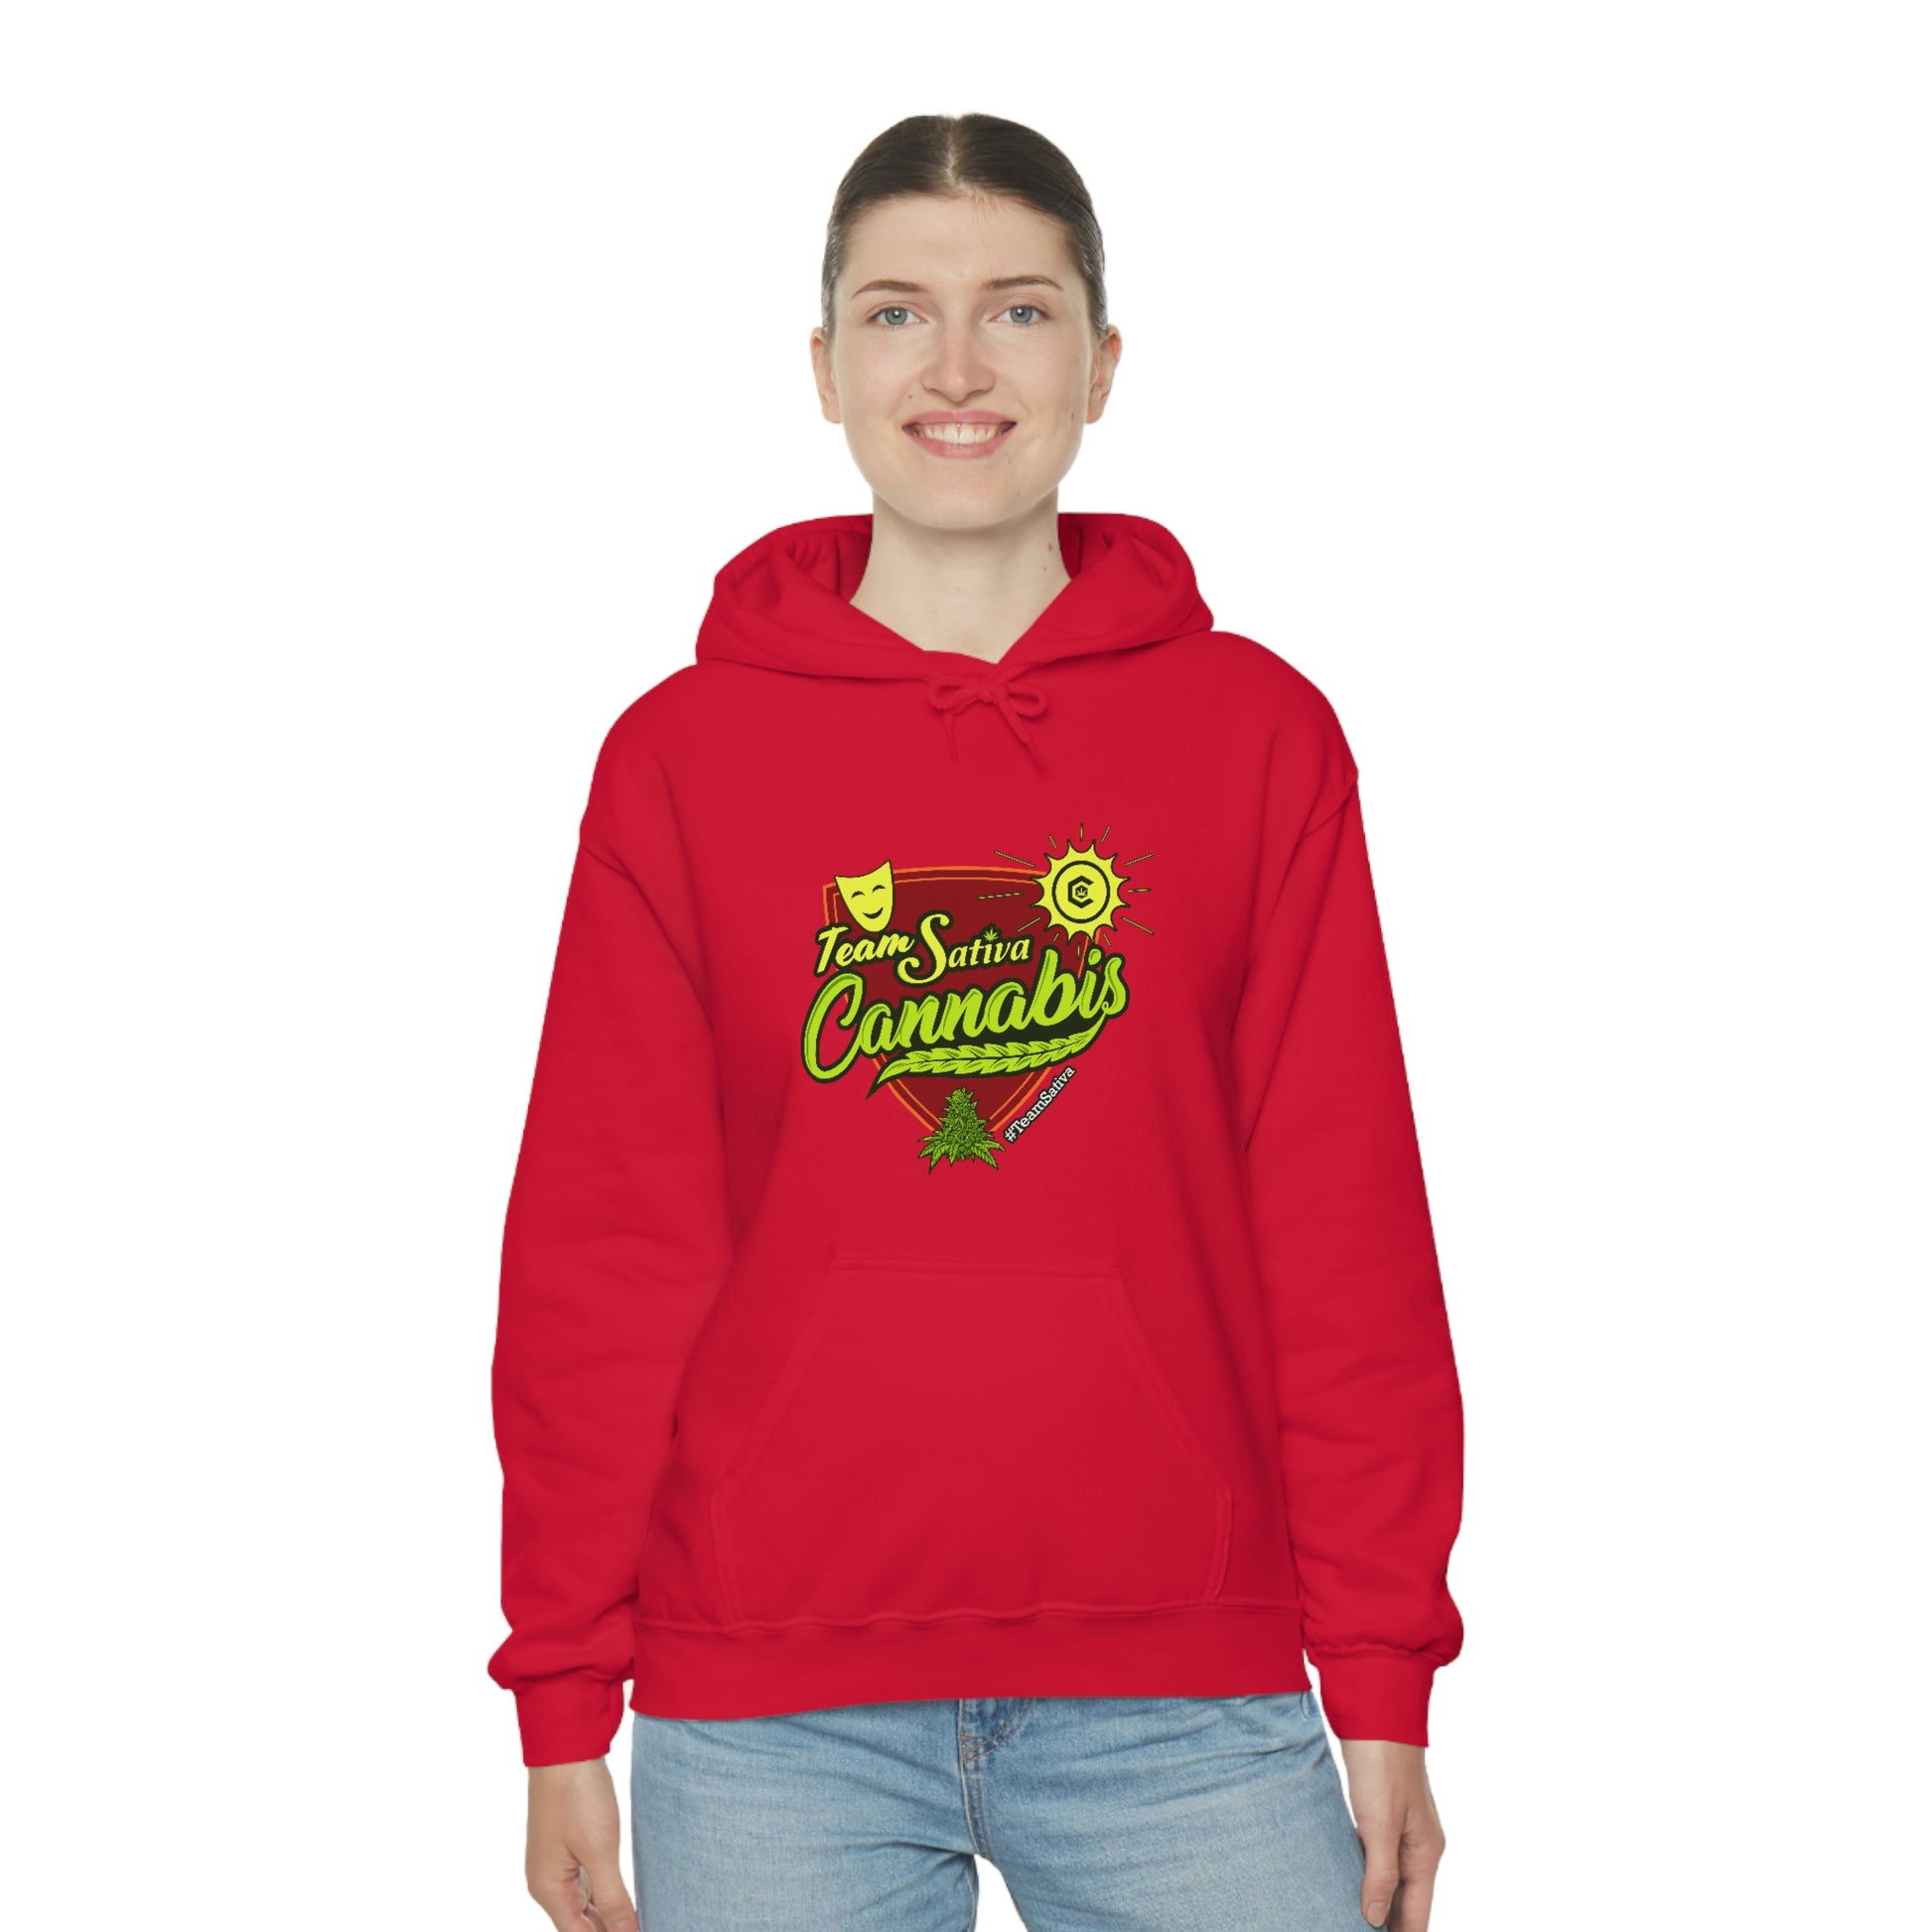 A woman wearing a red hooded Team Sativa Stoner Sweatshirt with the word cannabis on it.